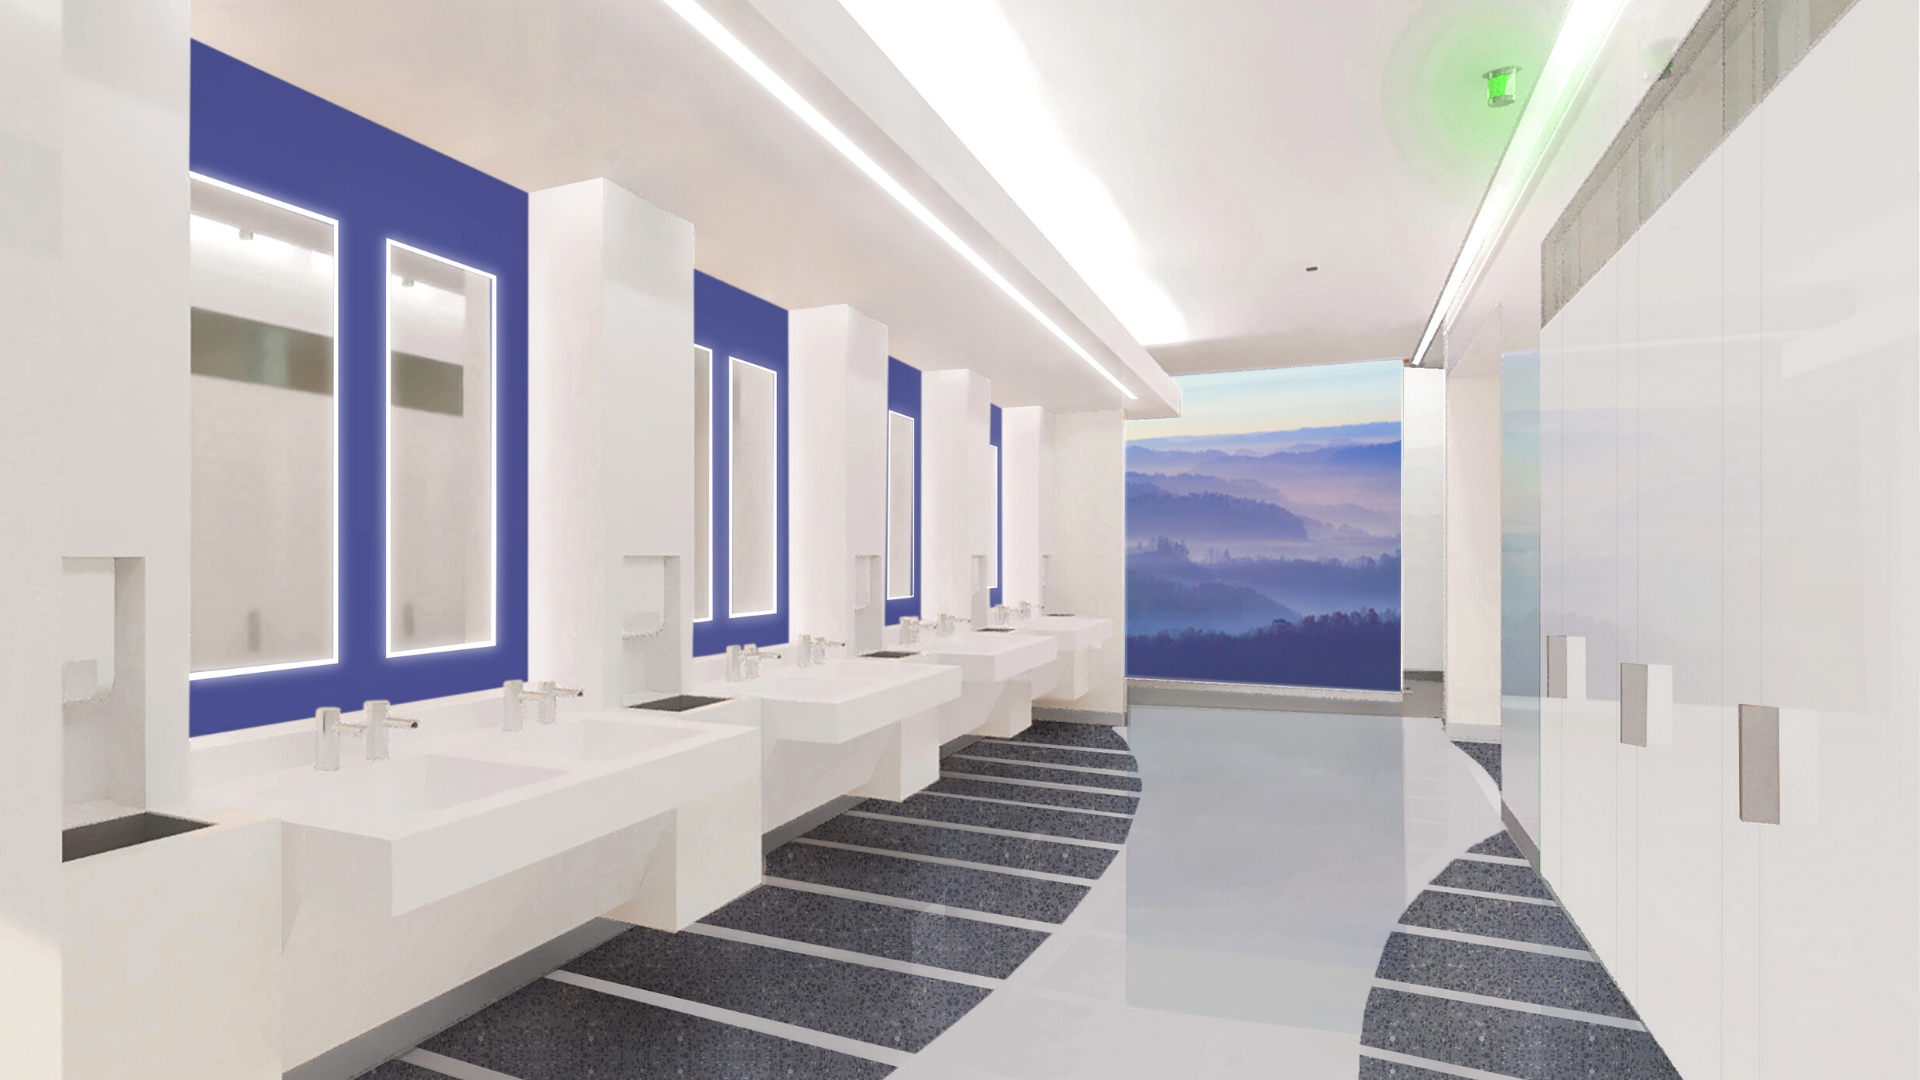 Graphic of proposed restroom redesign at BWI Marshall Airport